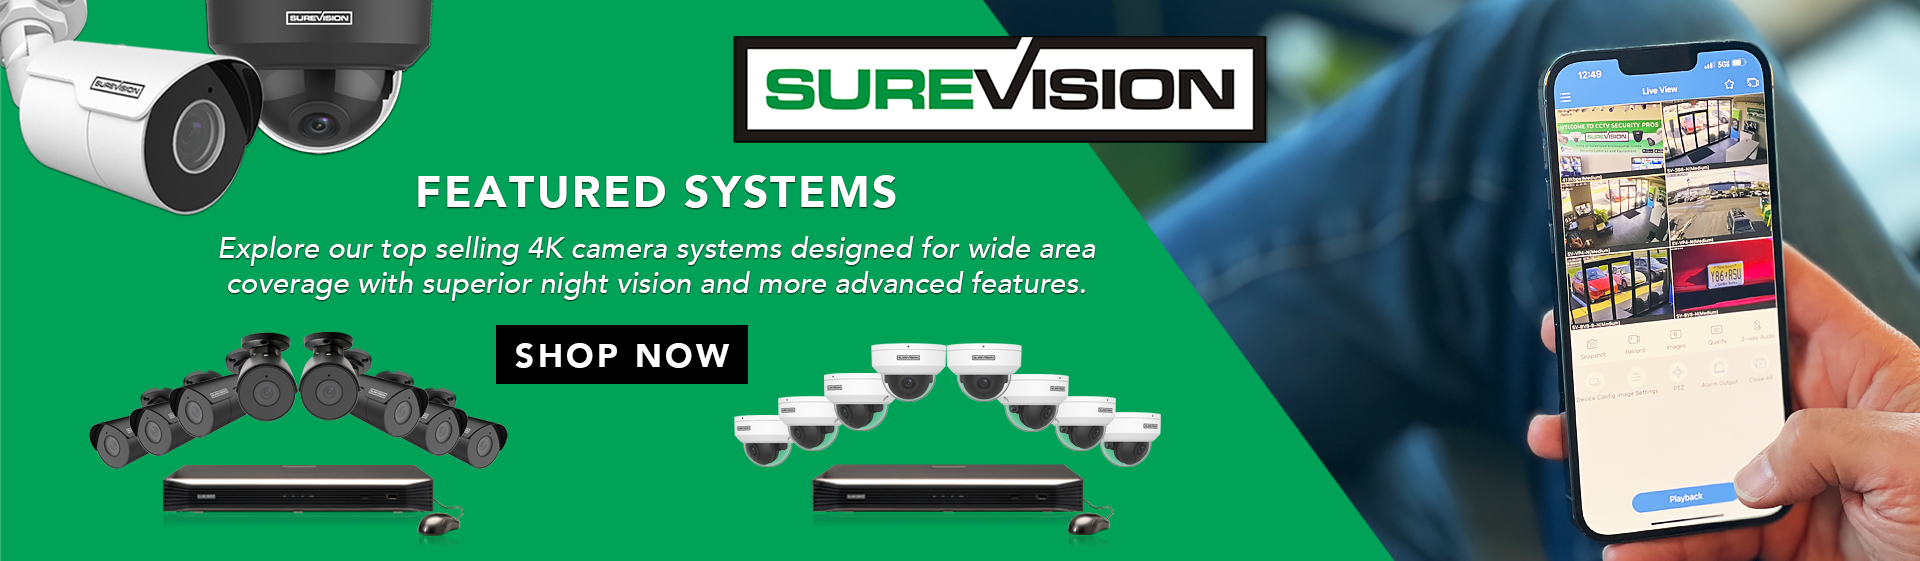 Security Camera Systems | No Subscription Fees